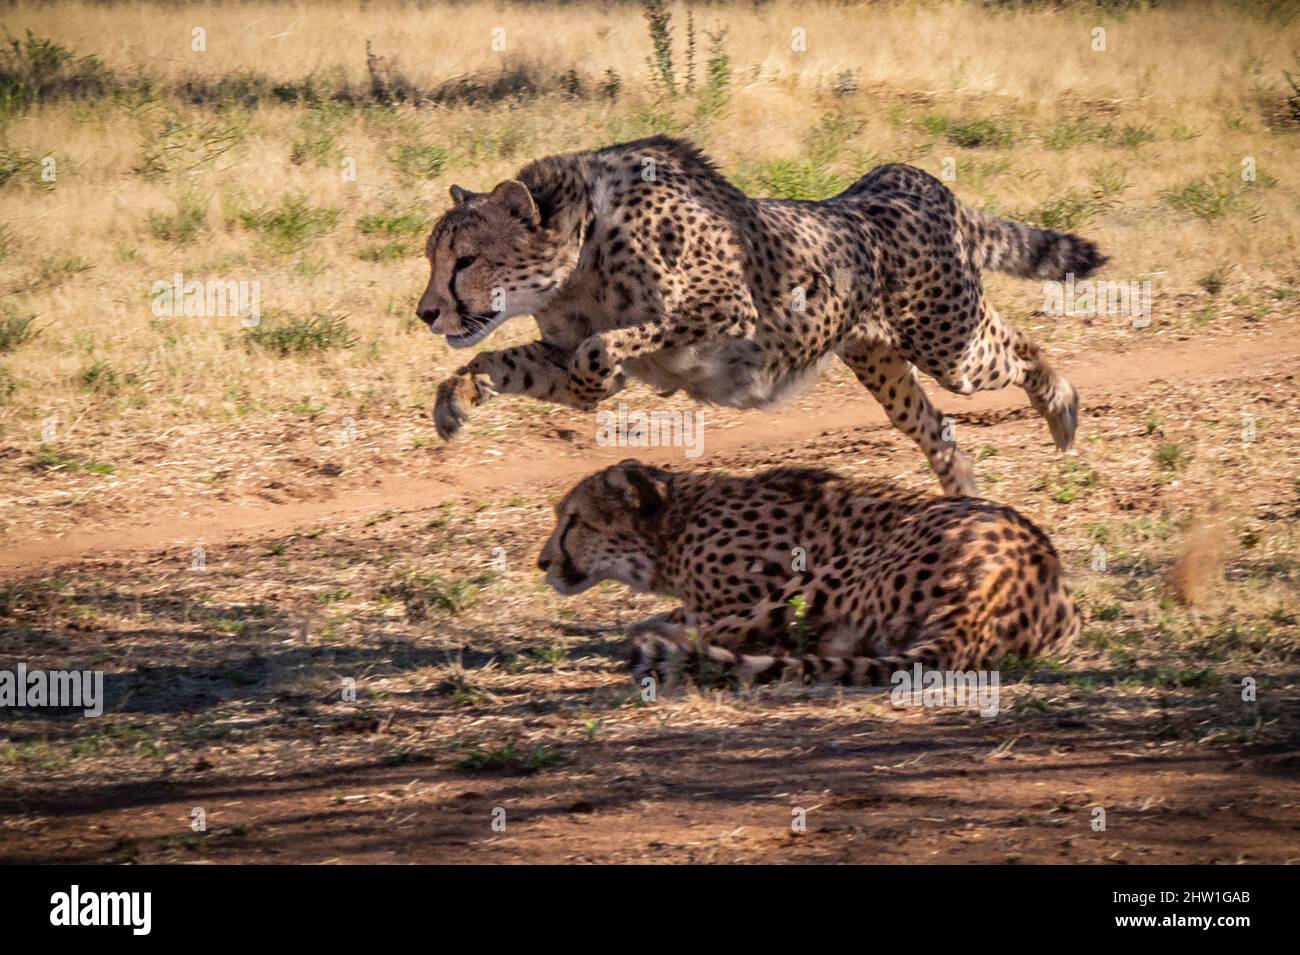 Namibia, Otjozondjupa region, Otjiwarongo, Cheetah Conservation Fund (CCF), to maintain the athletic muscles of the cheetahs collected at the center, a mechanical lure race is organized every morning in the cool (cheetah run program) Stock Photo